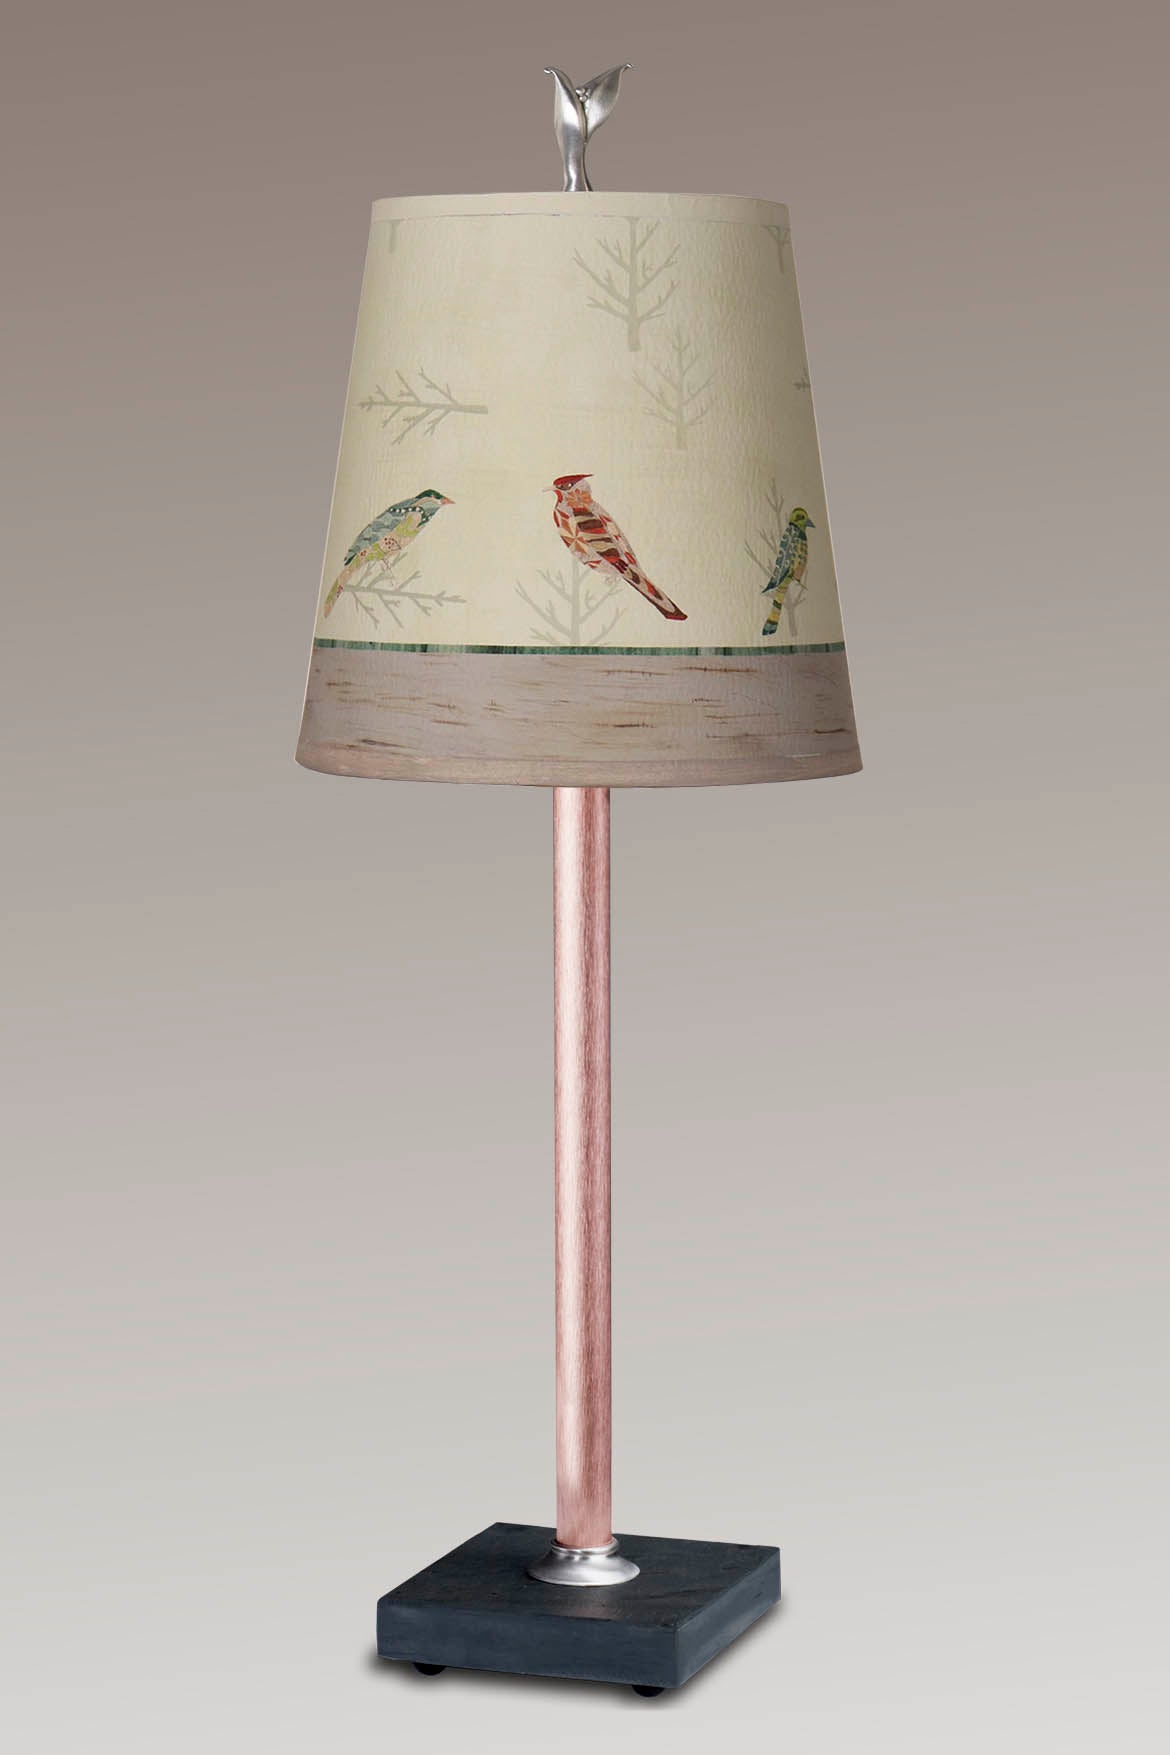 Janna Ugone & Co Table Lamp Copper Table Lamp with Small Drum Shade in Bird Friends